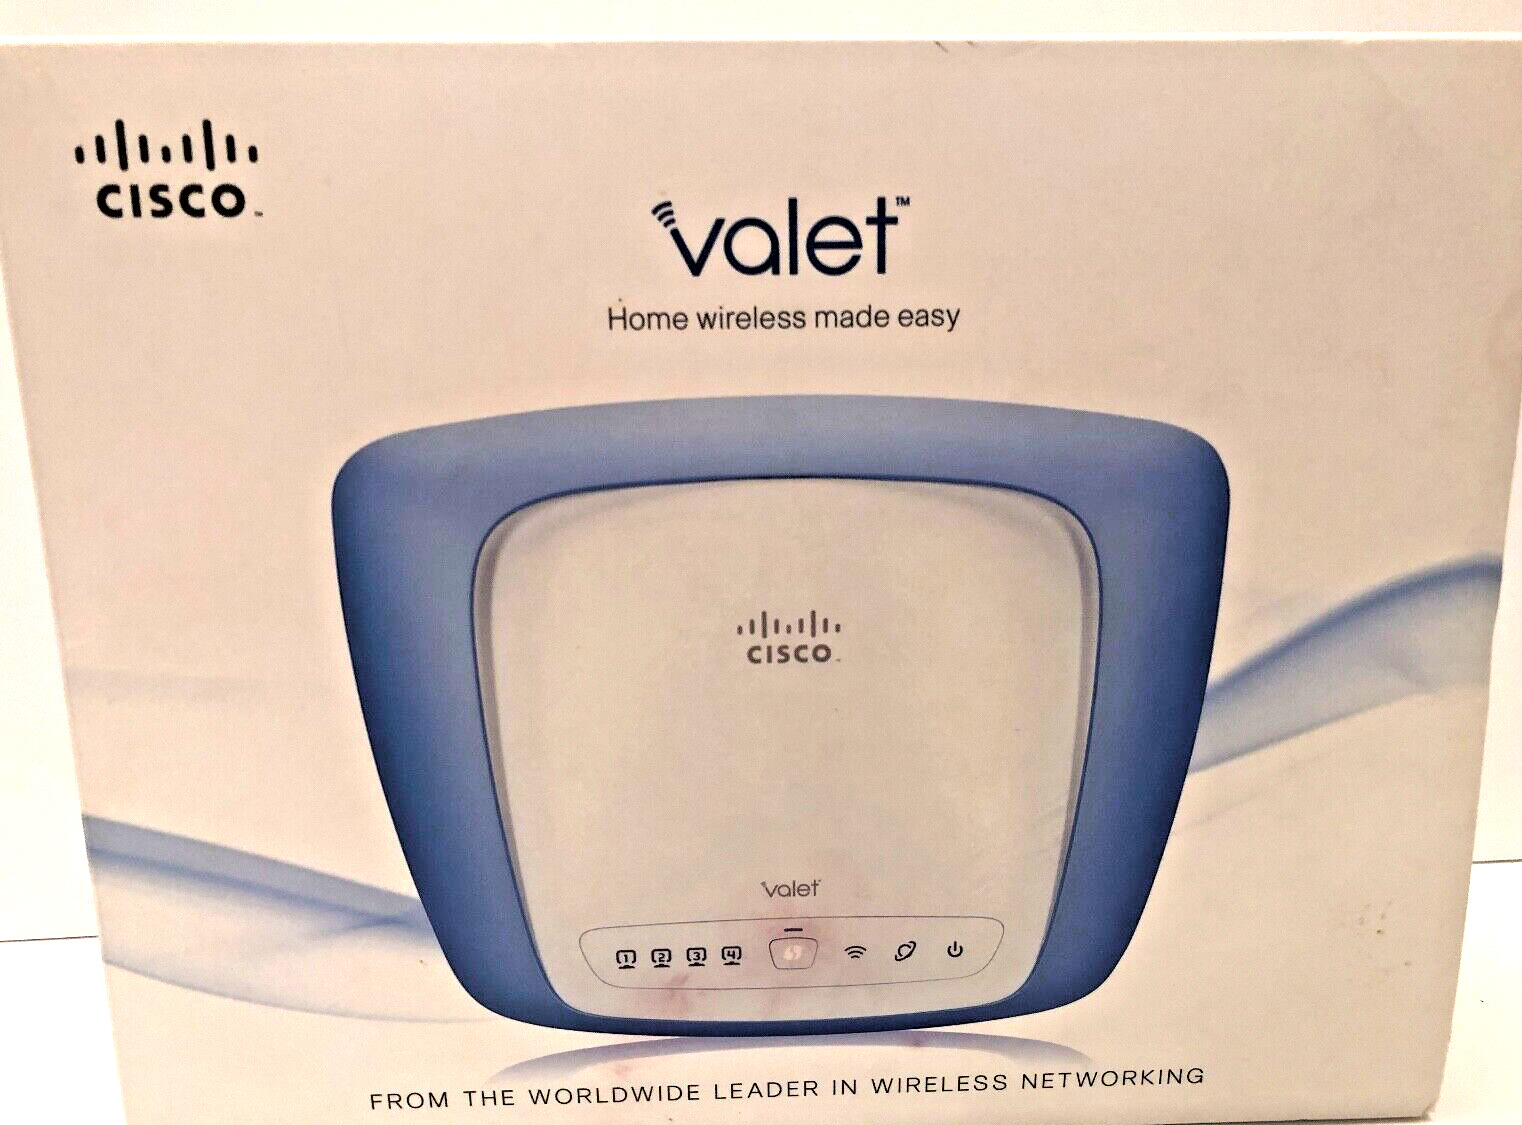 Cisco Valet Home Wireless Router Net Working System Model # M10 Links Computers.